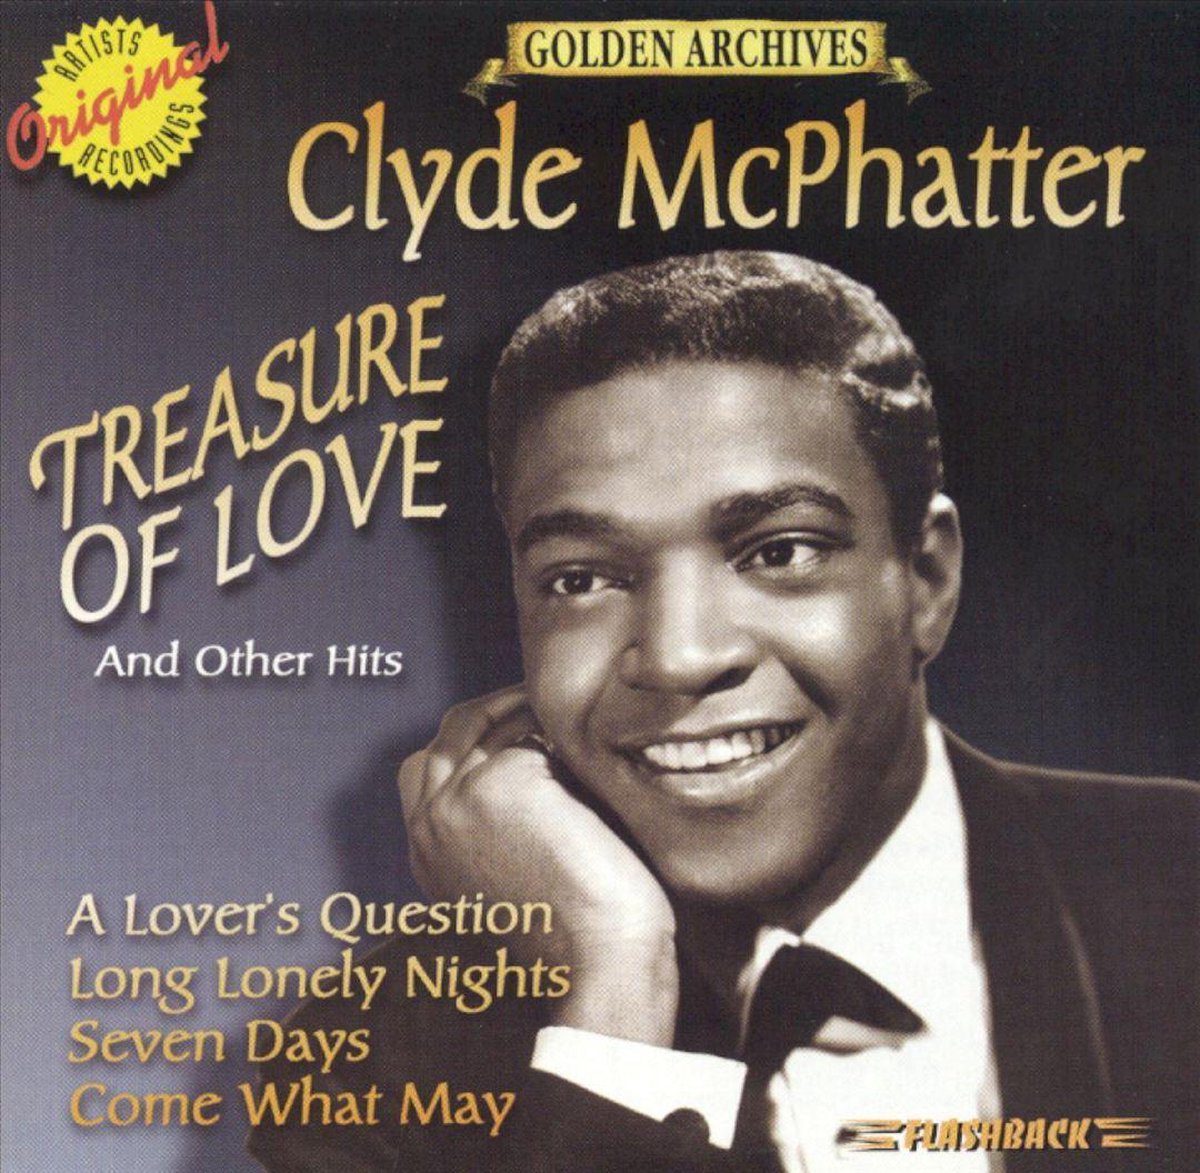 Treasure of Love & Other Hits - Clyde Mcphatter